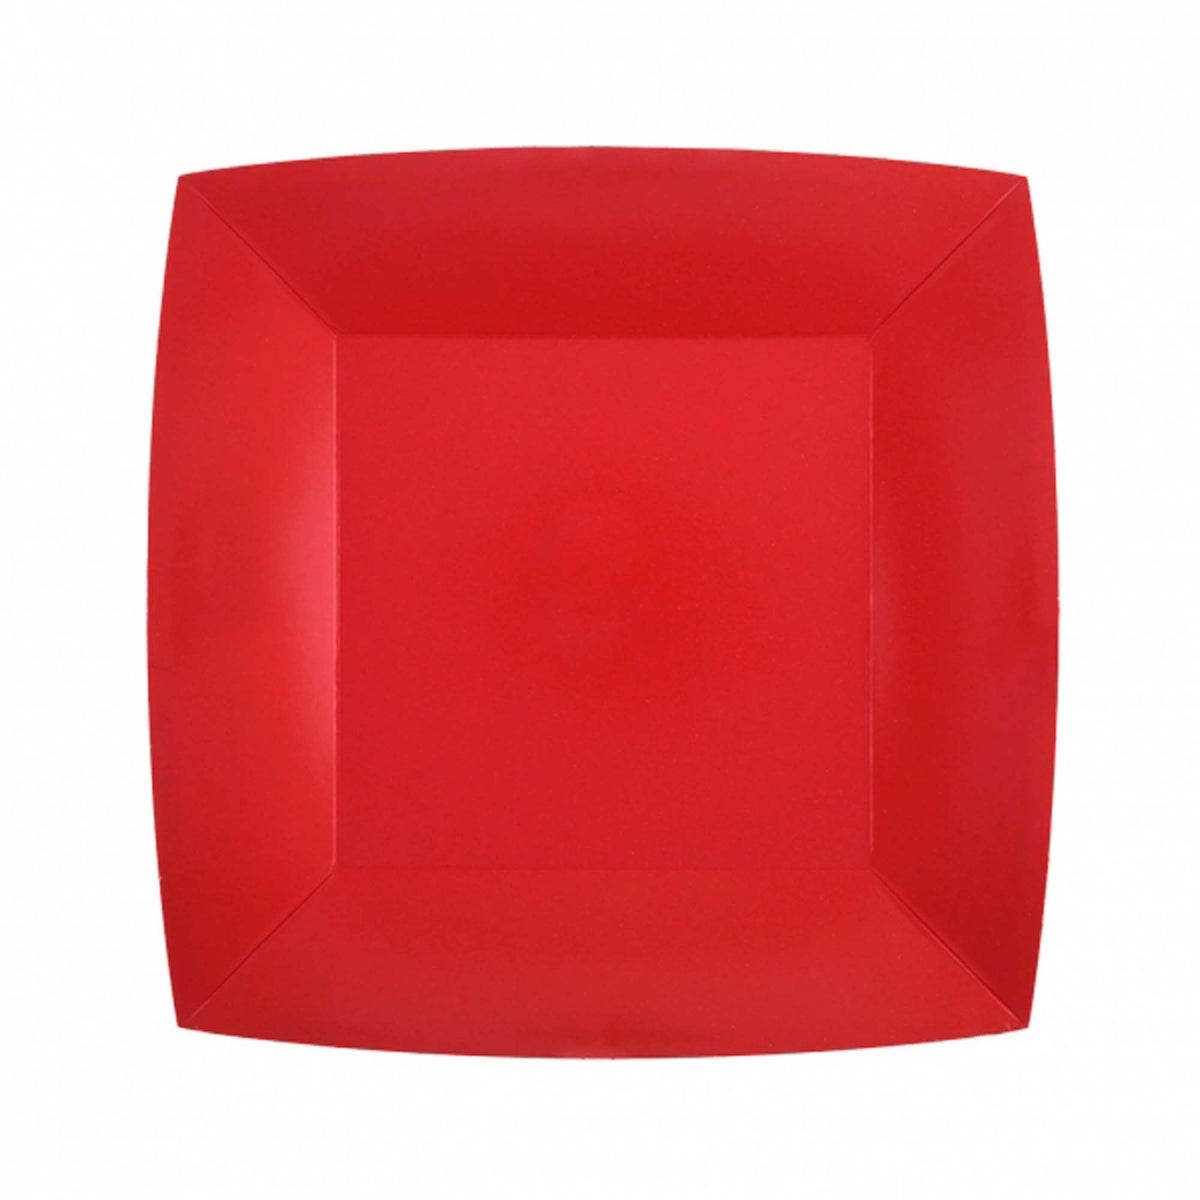 SANTEX Everyday Entertaining Red Small Square Dessert Party Paper Plates, 7 Inches, 10 Count 3660380071976